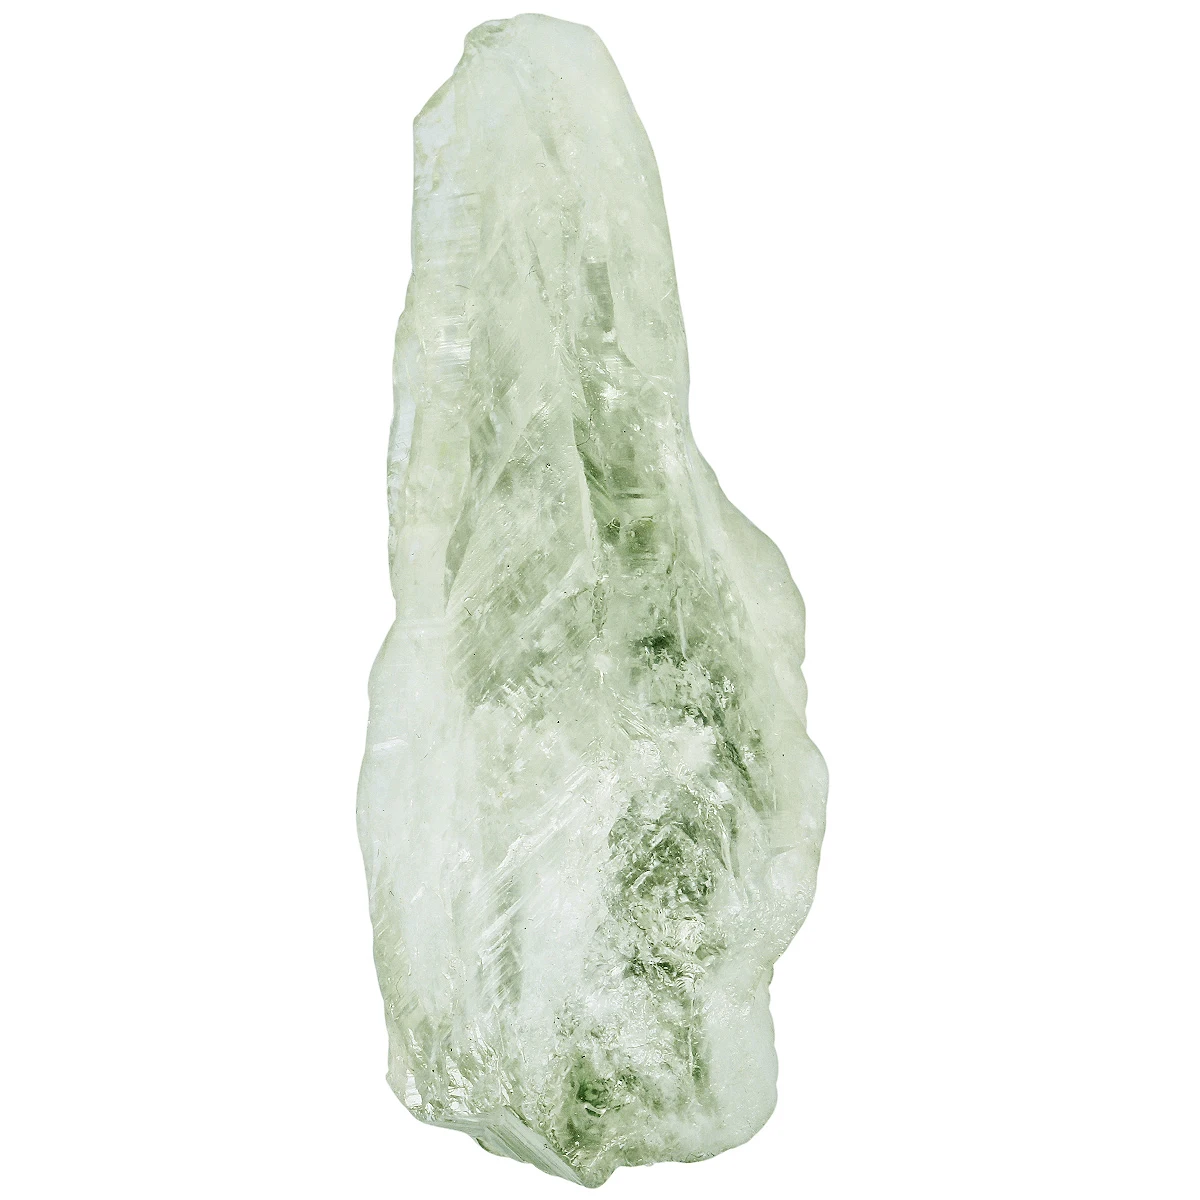 1Pc Irregular Green Crystal Quartz Point Wand Healing Rough Stone Minerals Specimen For Home Decor DIY Jewelry Accessories tumbeelluwa natural clear rock crystal quartz cluster healing gem stone druzy geode specimen figurine for fengshui home decor